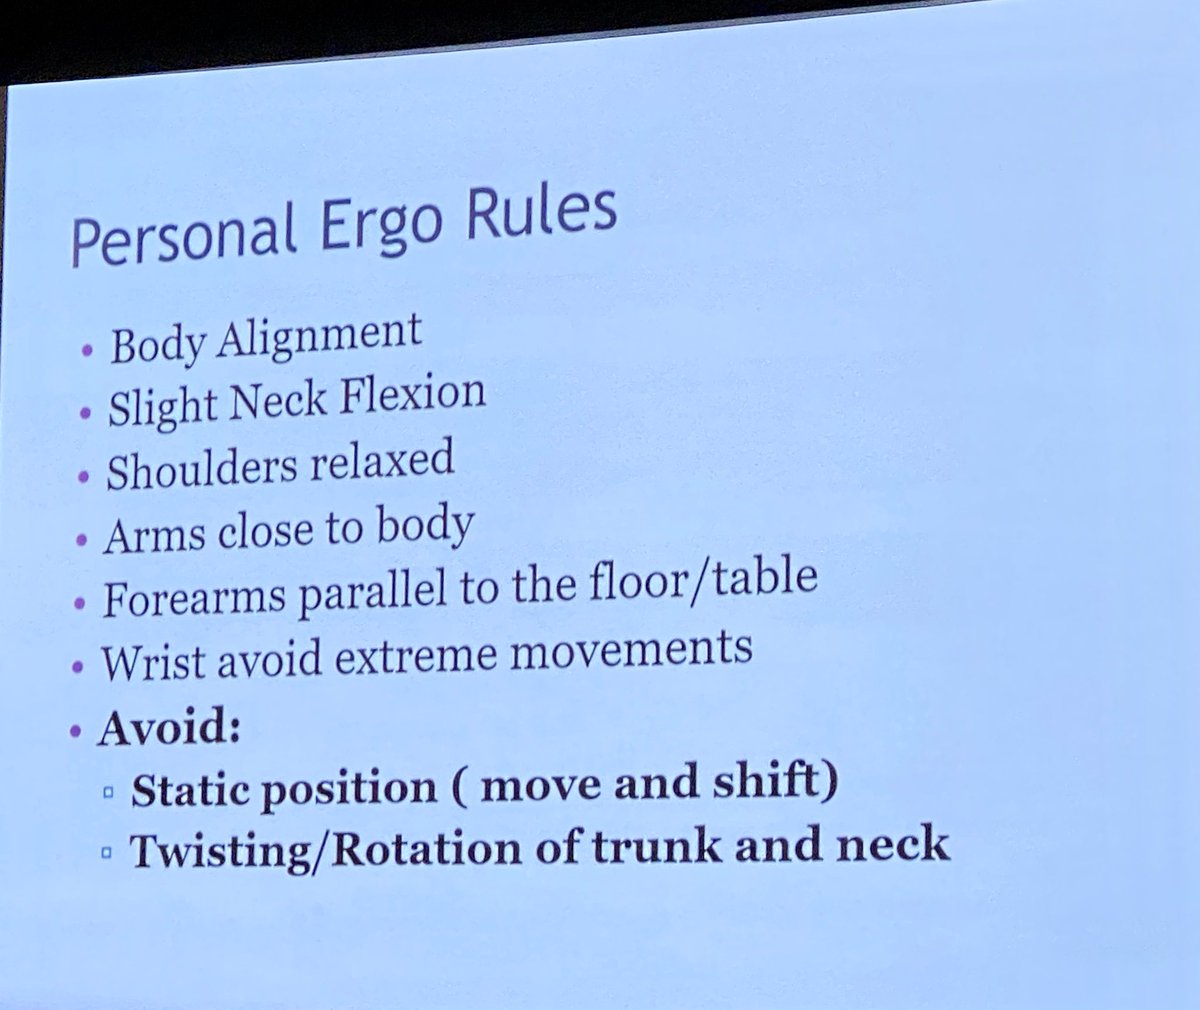 @menefeekp @aboutKP @KPMedSchool @UCSD_ObGyn giving invaluable insight and reminders for #surgeons to care about the #ergonomics of what we do. #SUFU20 @sufuorg @FPMRS #urology #urogynecology @malbosd @YSL_MD